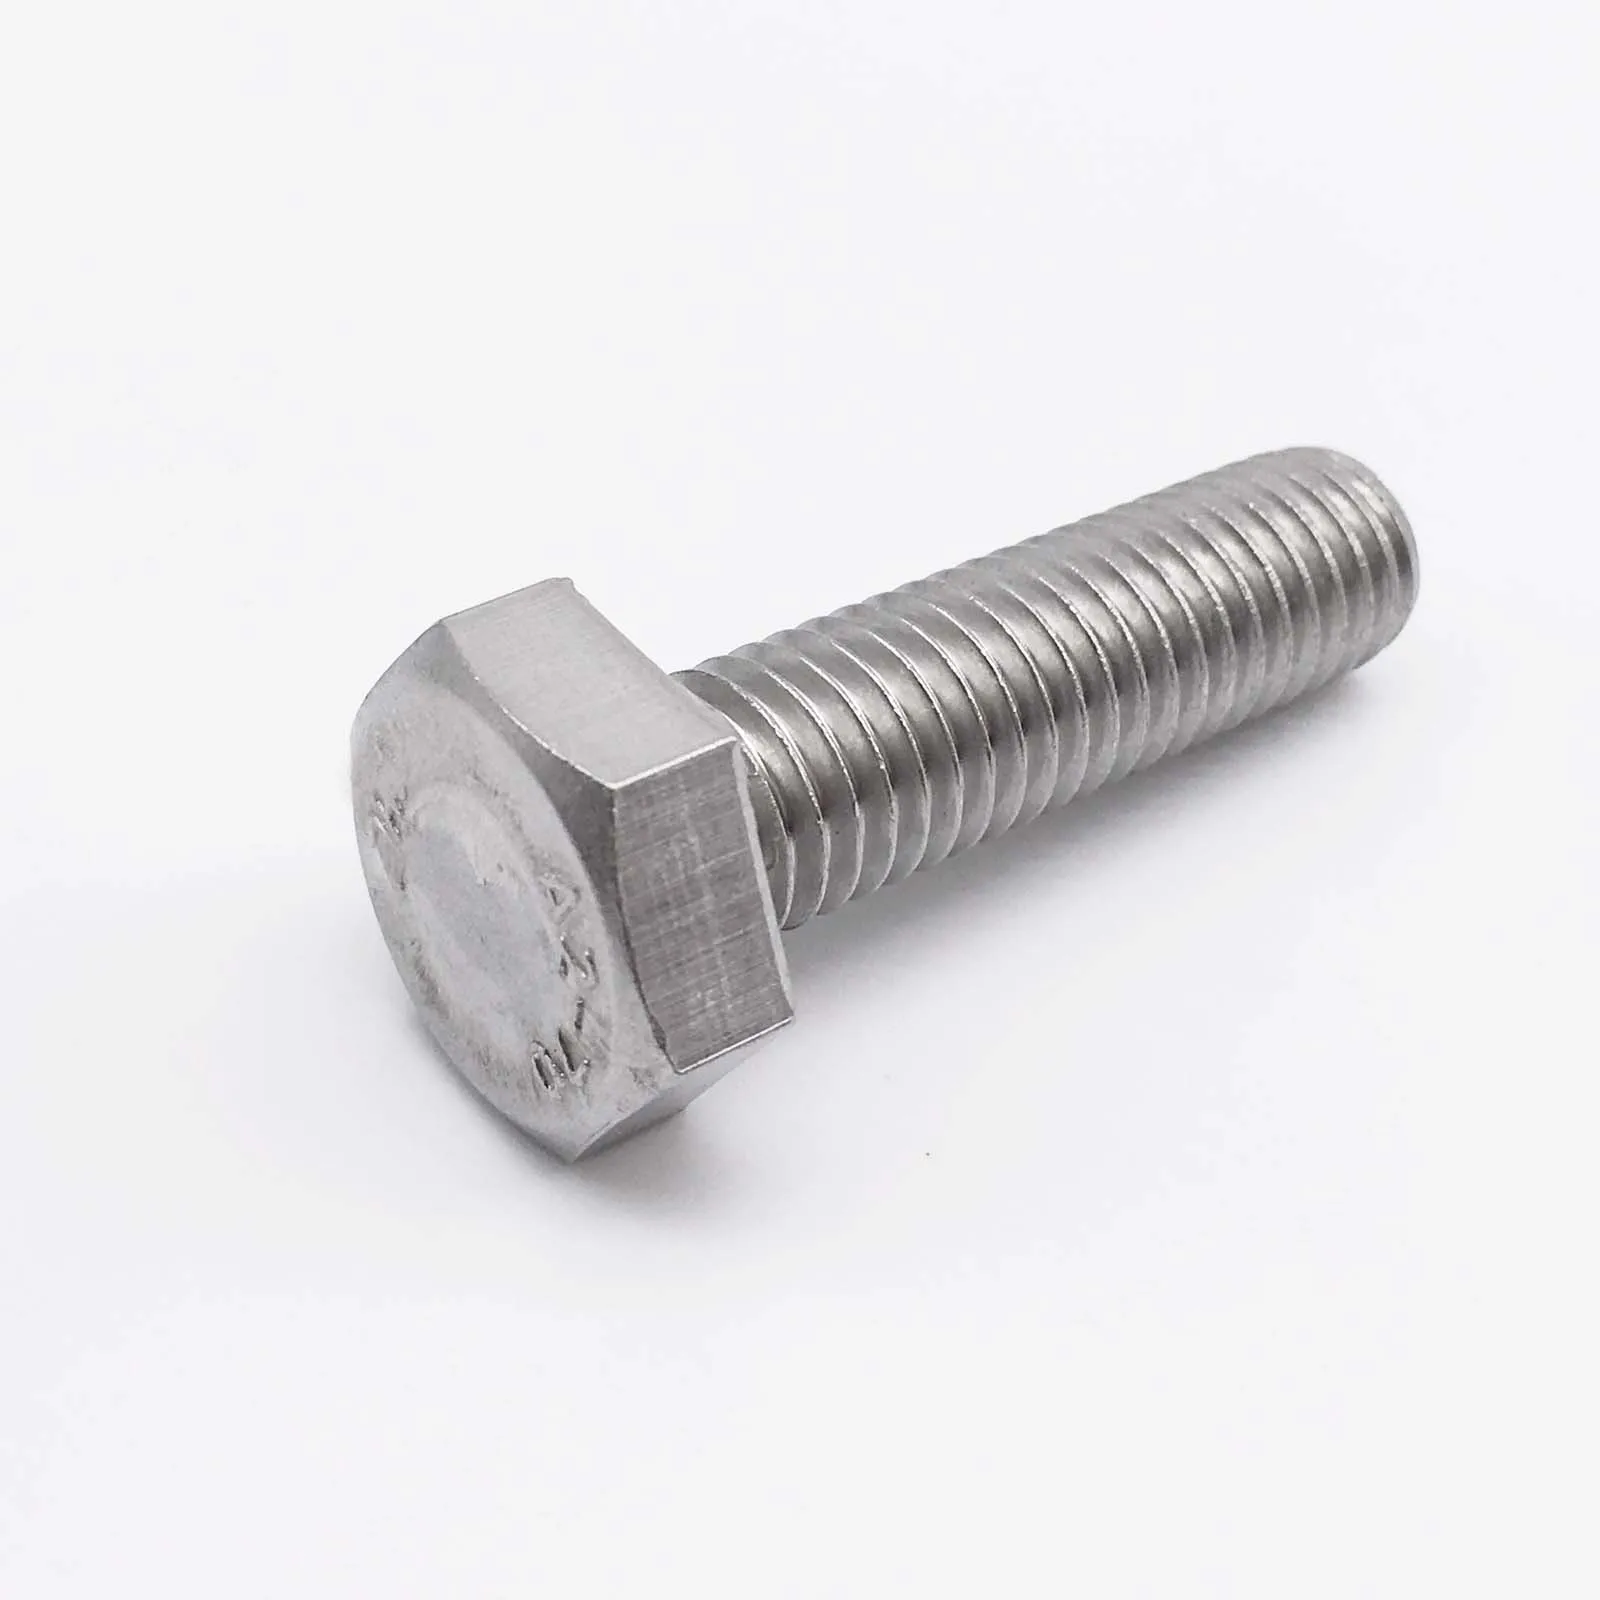 Stainless Steel A2 M10 X 35 Hex Bolt 304 5 Pack 